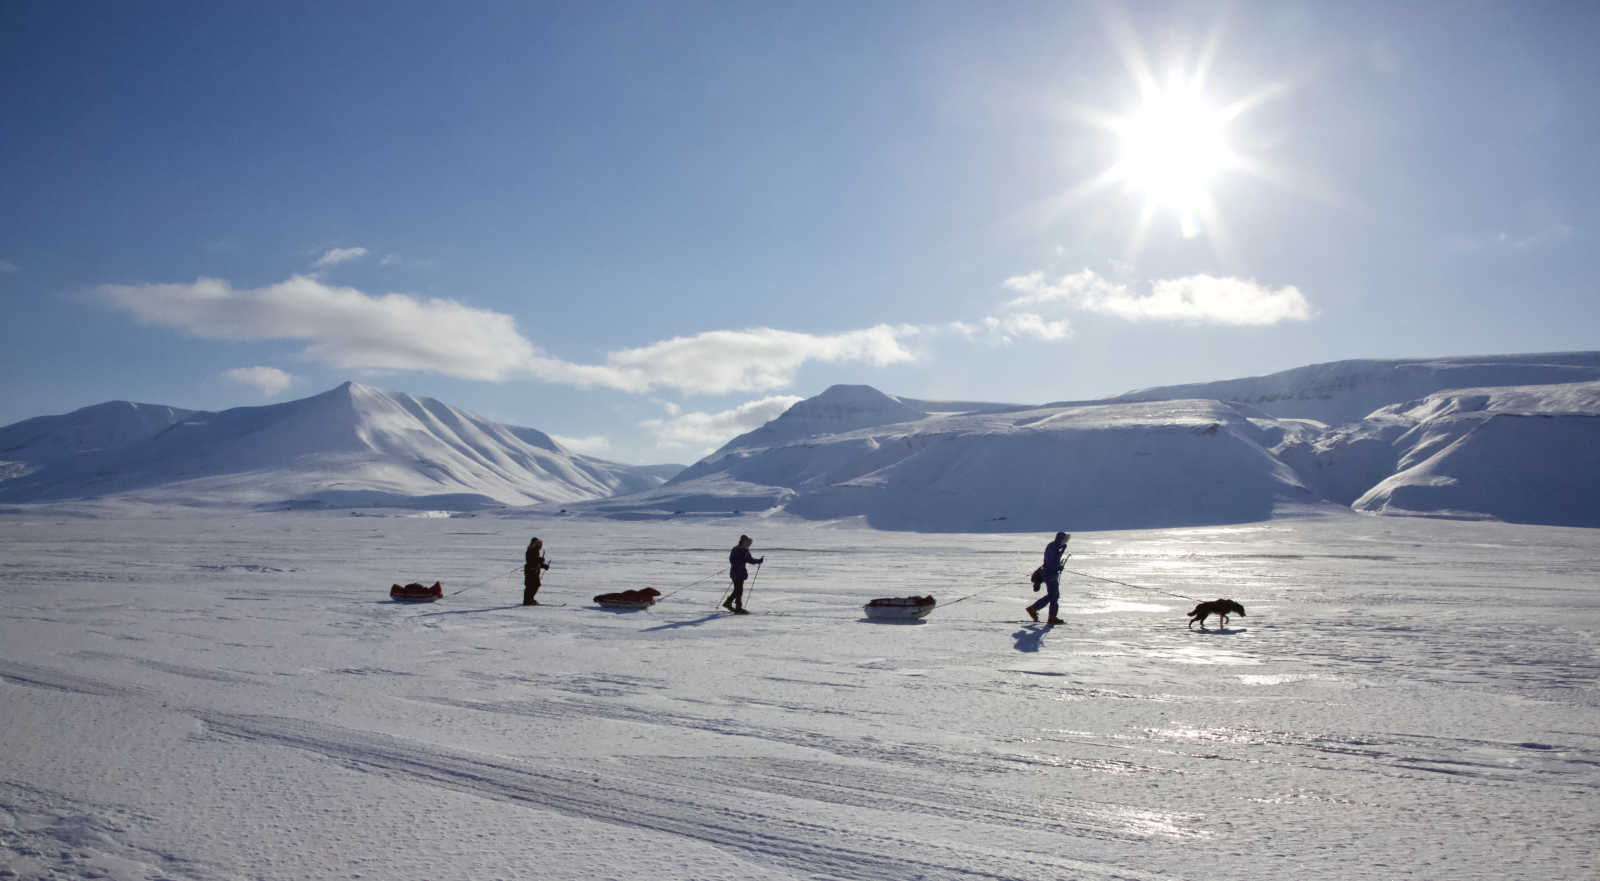 Three figures ski across the icy wasteland of Svalbard, each pulling a sled.